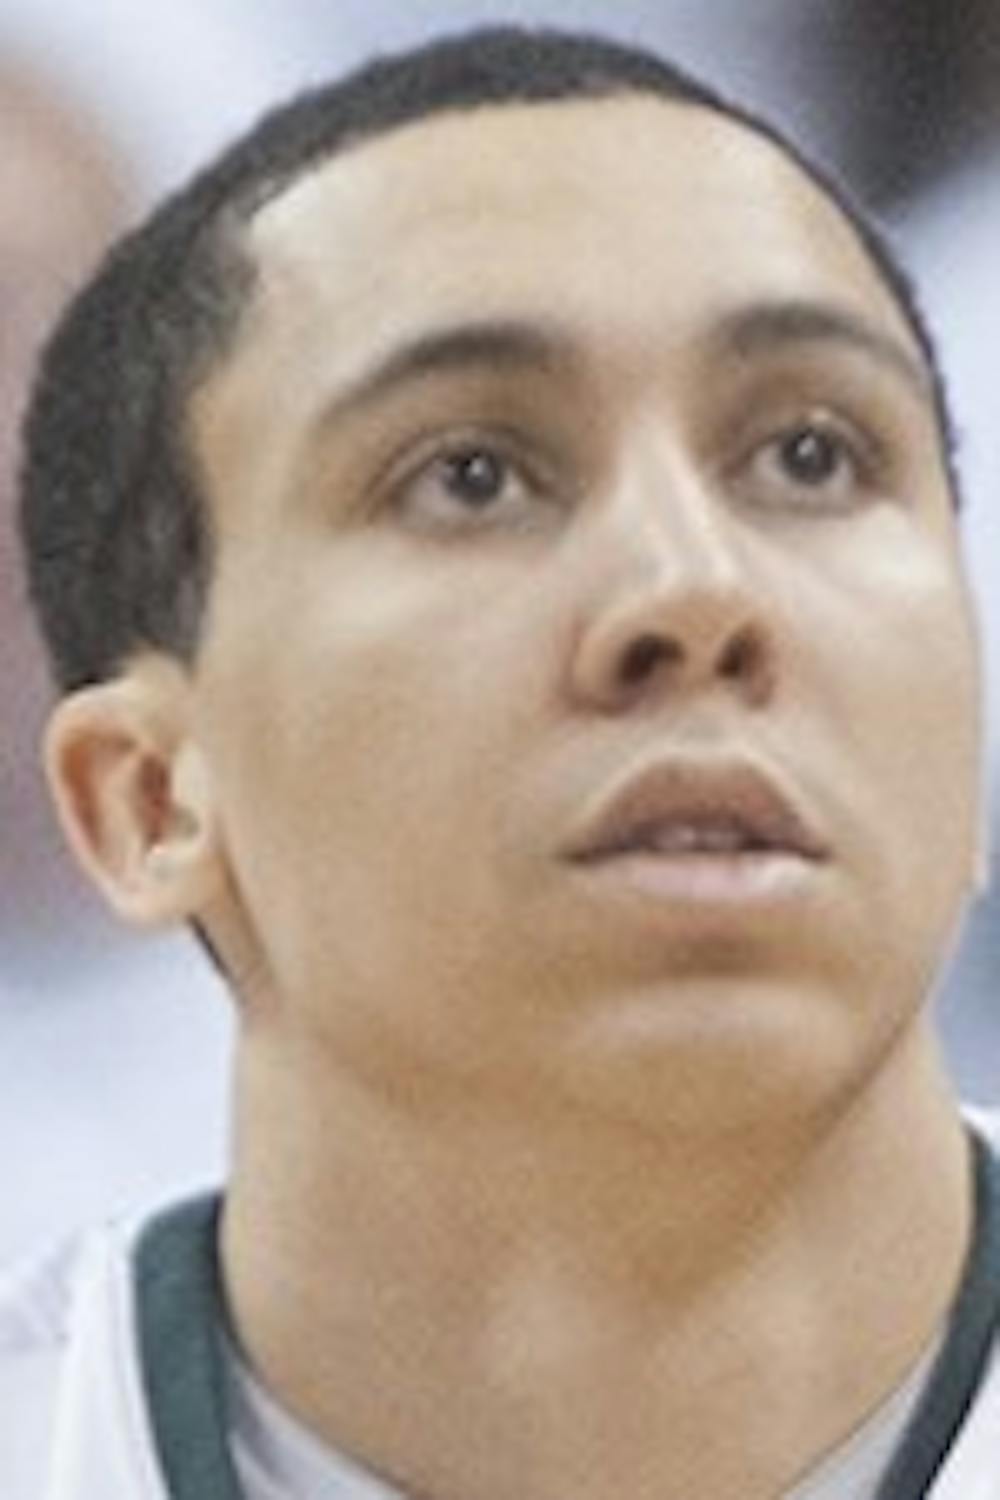 	<p><strong>Travis Trice — B-</strong></p>

	<p>Multiple concussions and a broken nose kept Trice out of nine games this season and had him frequently trying to get back into game shape. It made for a difficult season for Trice, who essentially mirrored his numbers from a year ago. He will spend this offseason working to add strength that would allow him to penetrate defenses easier, both to get teammates better scoring opportunities and to improve his scoring in the lane.</p>